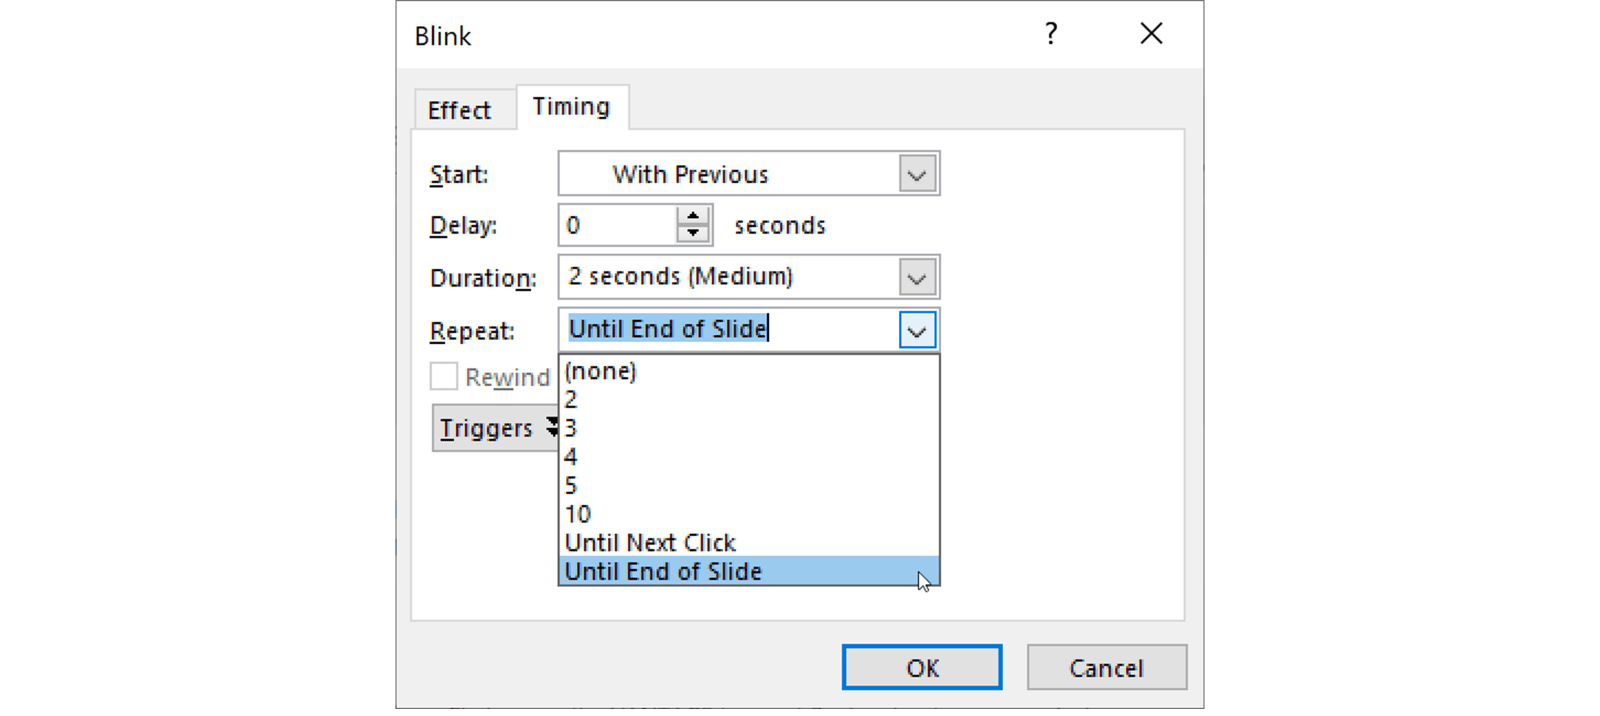 Screenshot of the effect options for the Blink animation in PowerPoint. The option to repeat teh animation until the end of the slide is selected. 